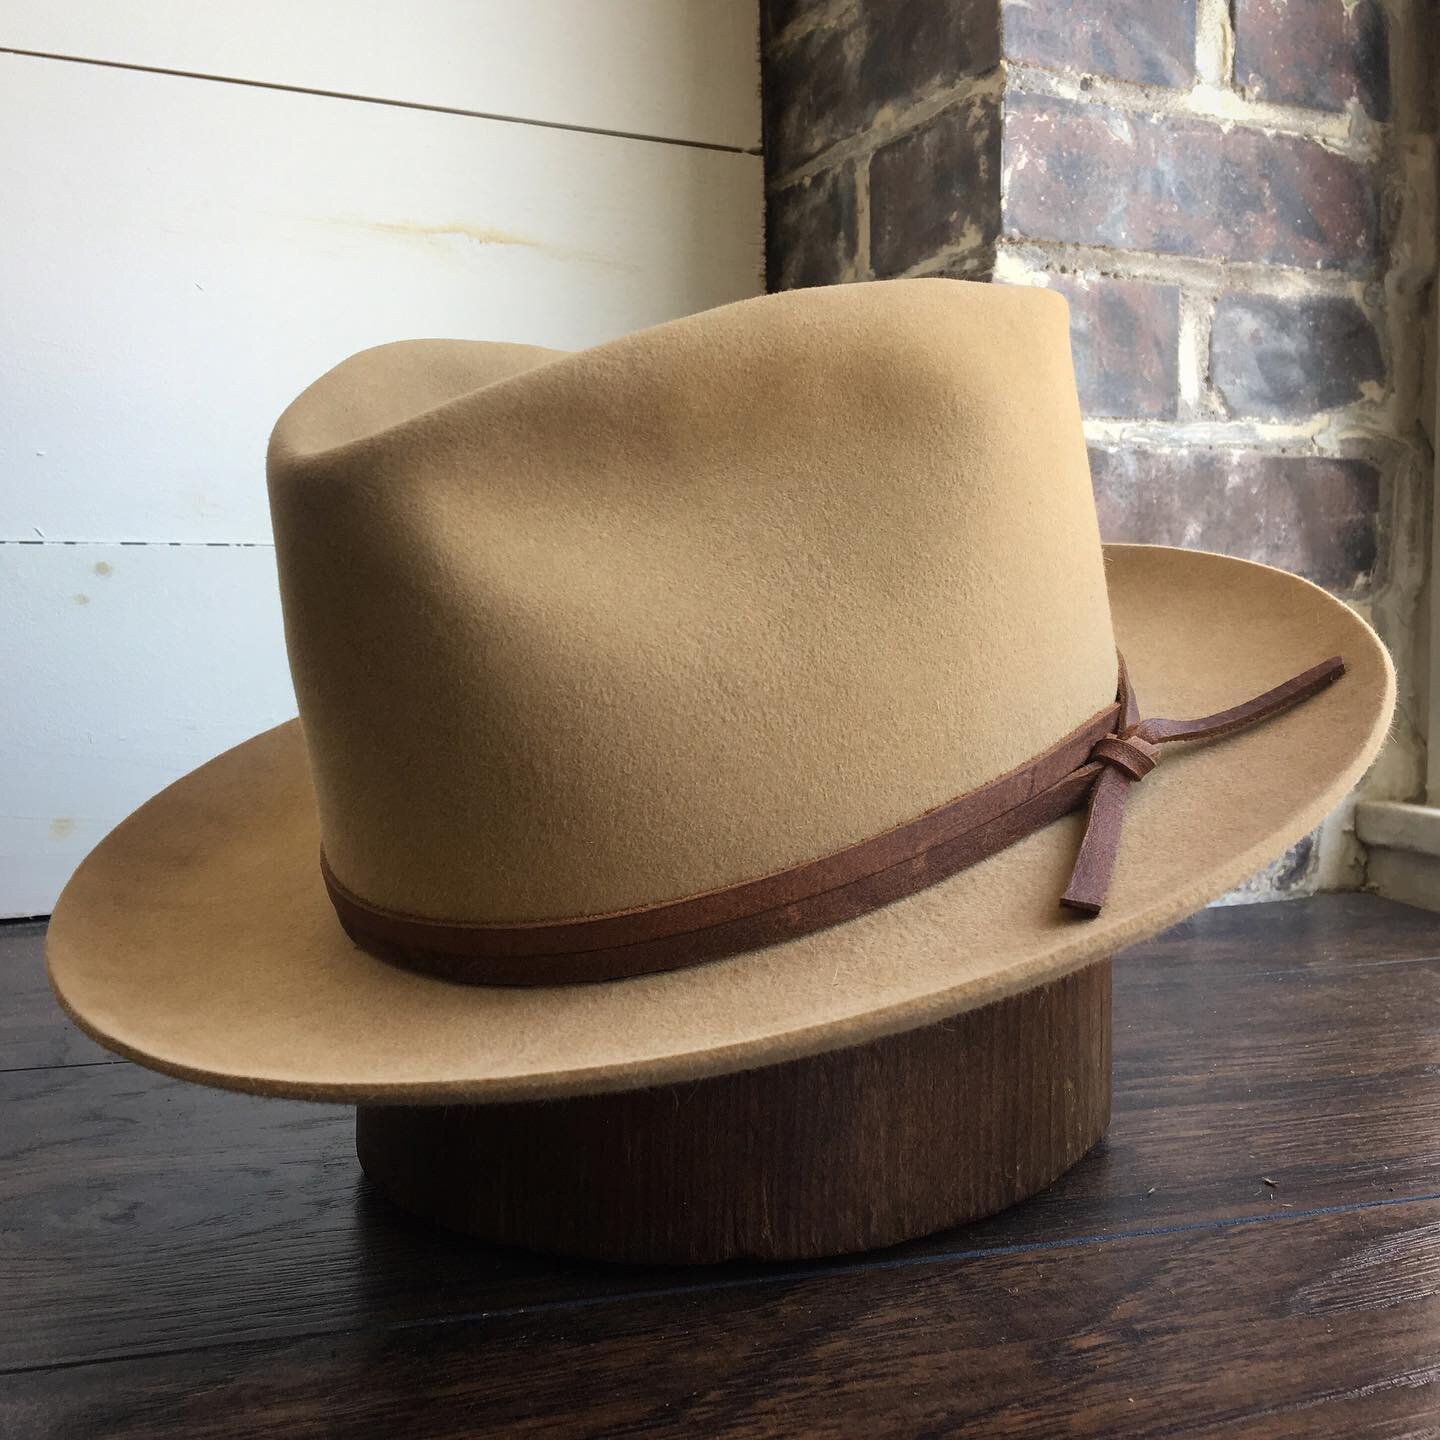  Camel, dress weight, pure beaver.  Low diamond crown.  2 1/2” flanged brim.  Brown leather outer. 